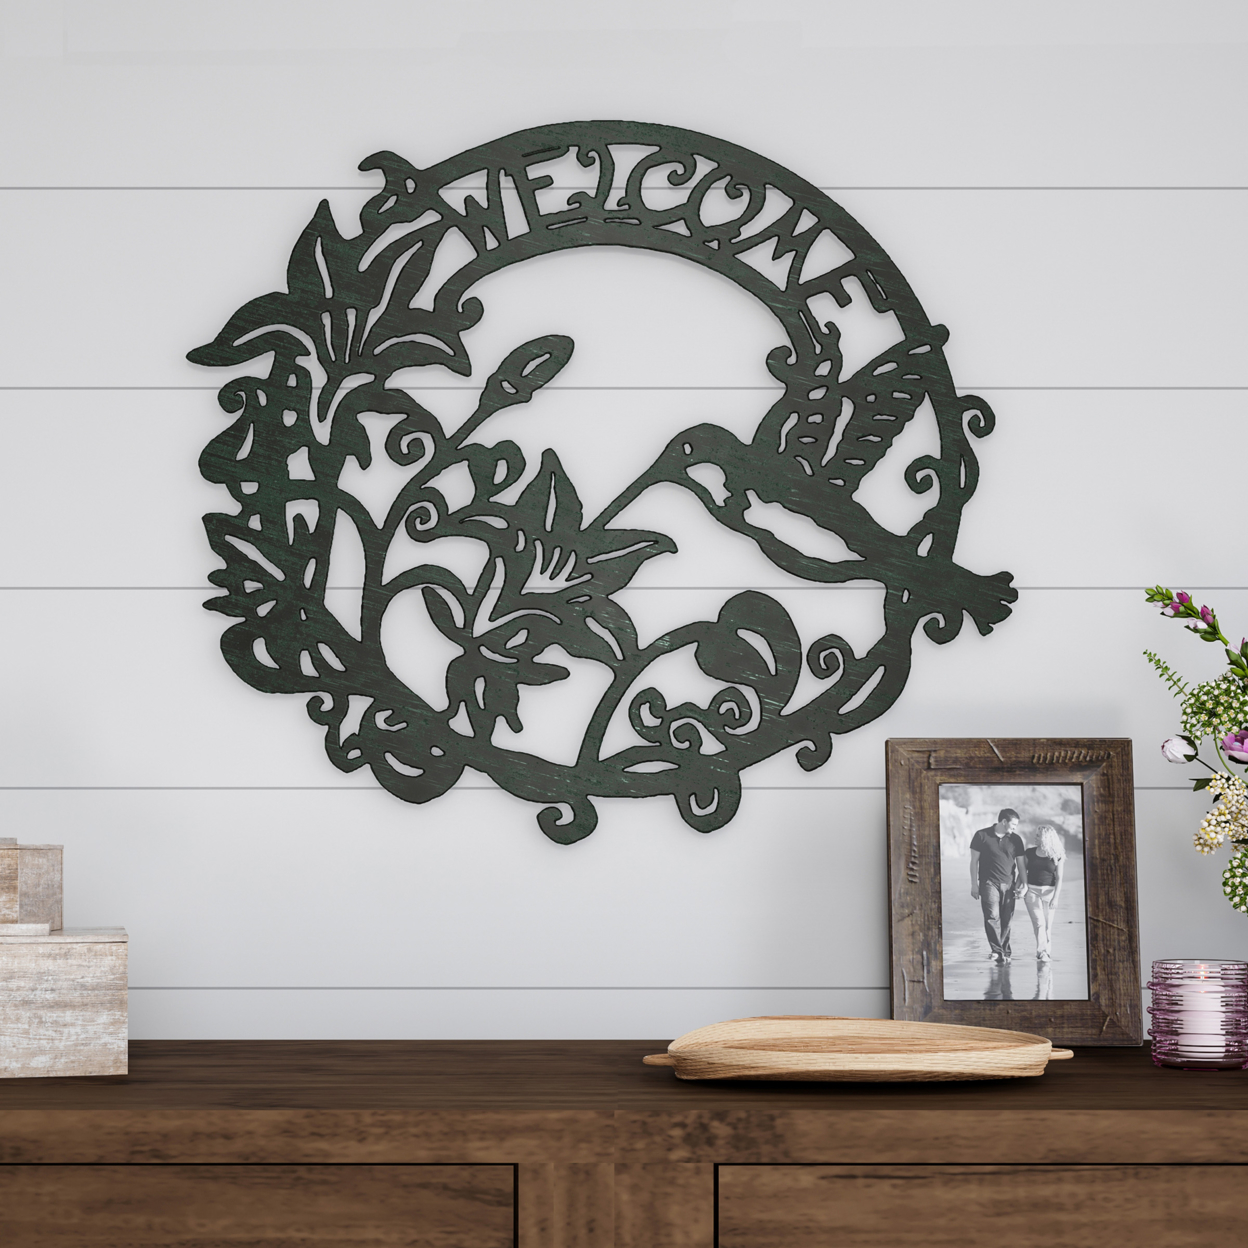 Metal Cutout- Welcome Decorative Wall Sign Word Art Home Accent Humming Bird Wall Hanging